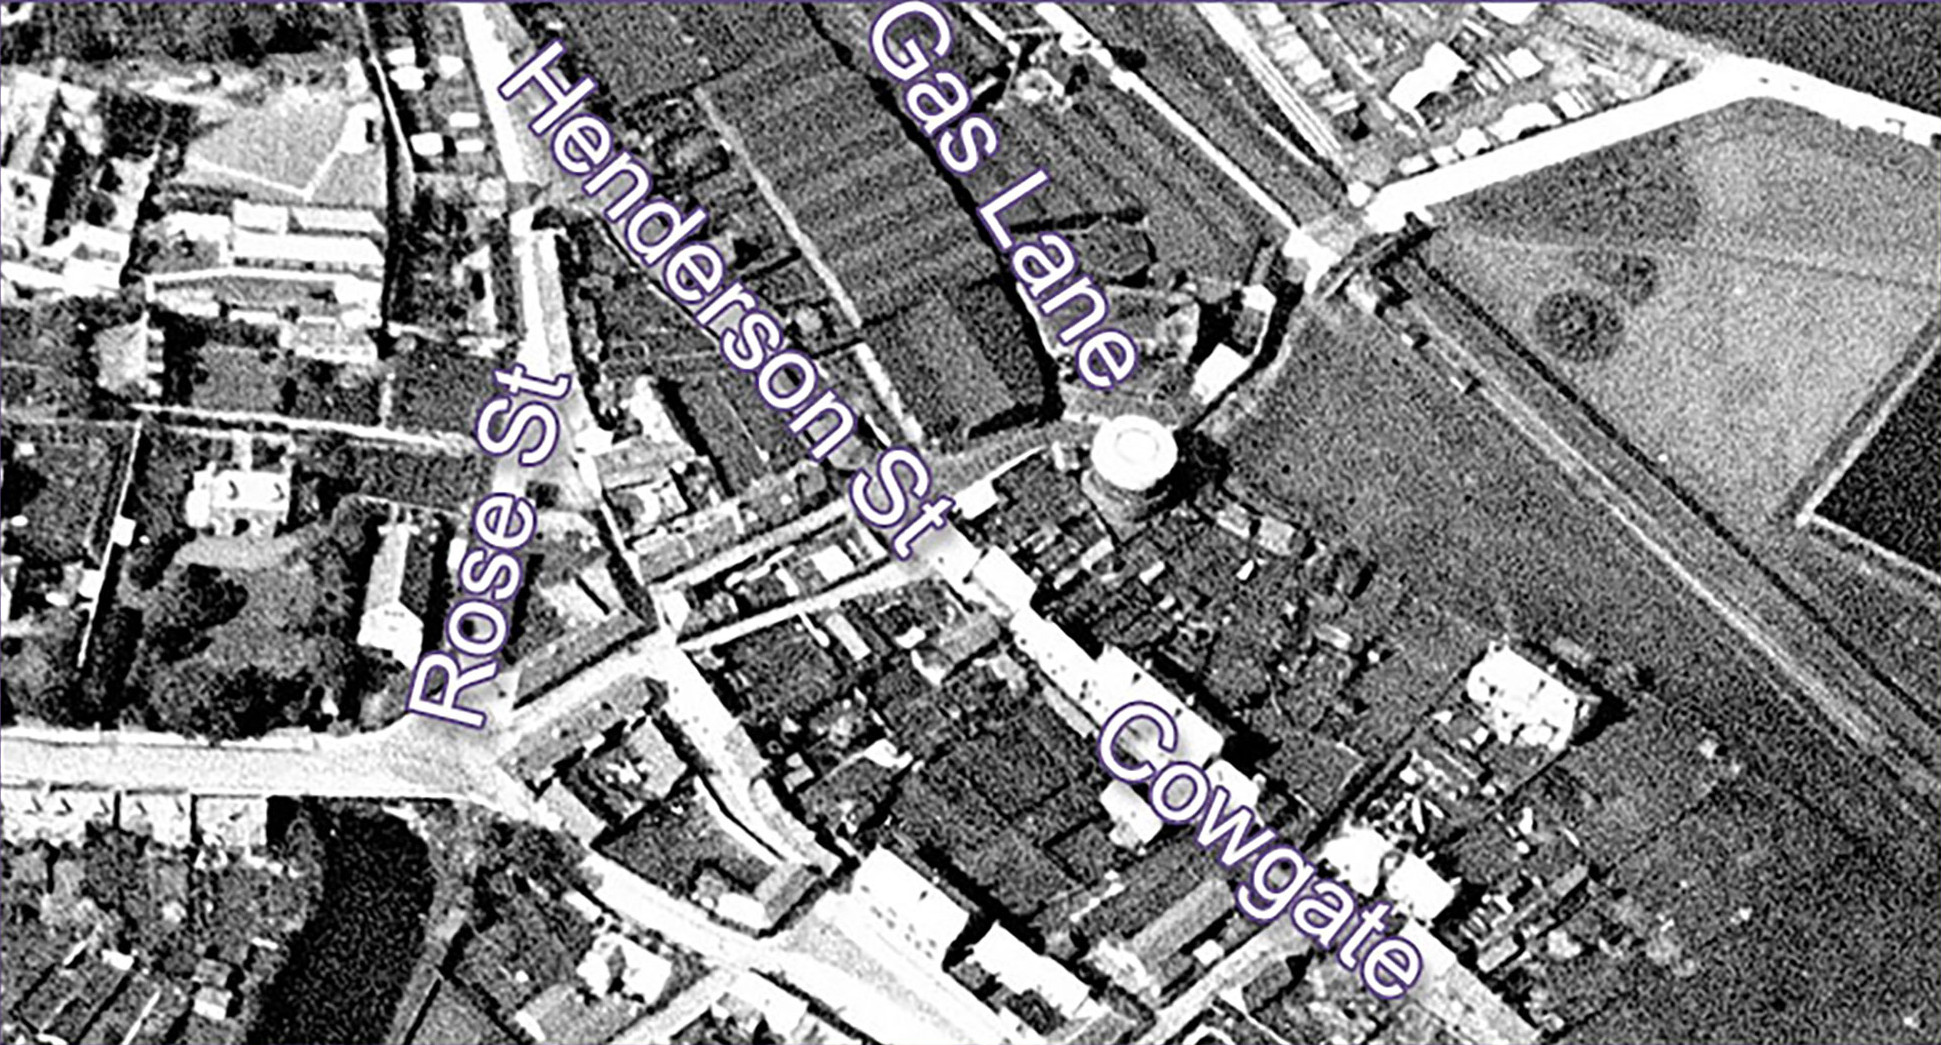 Tayport Heritage Trail - Board 20 - 1940s aerial of Mill Dam area, Donaldson’s Timber Yard, Gas Works & GAS LANE